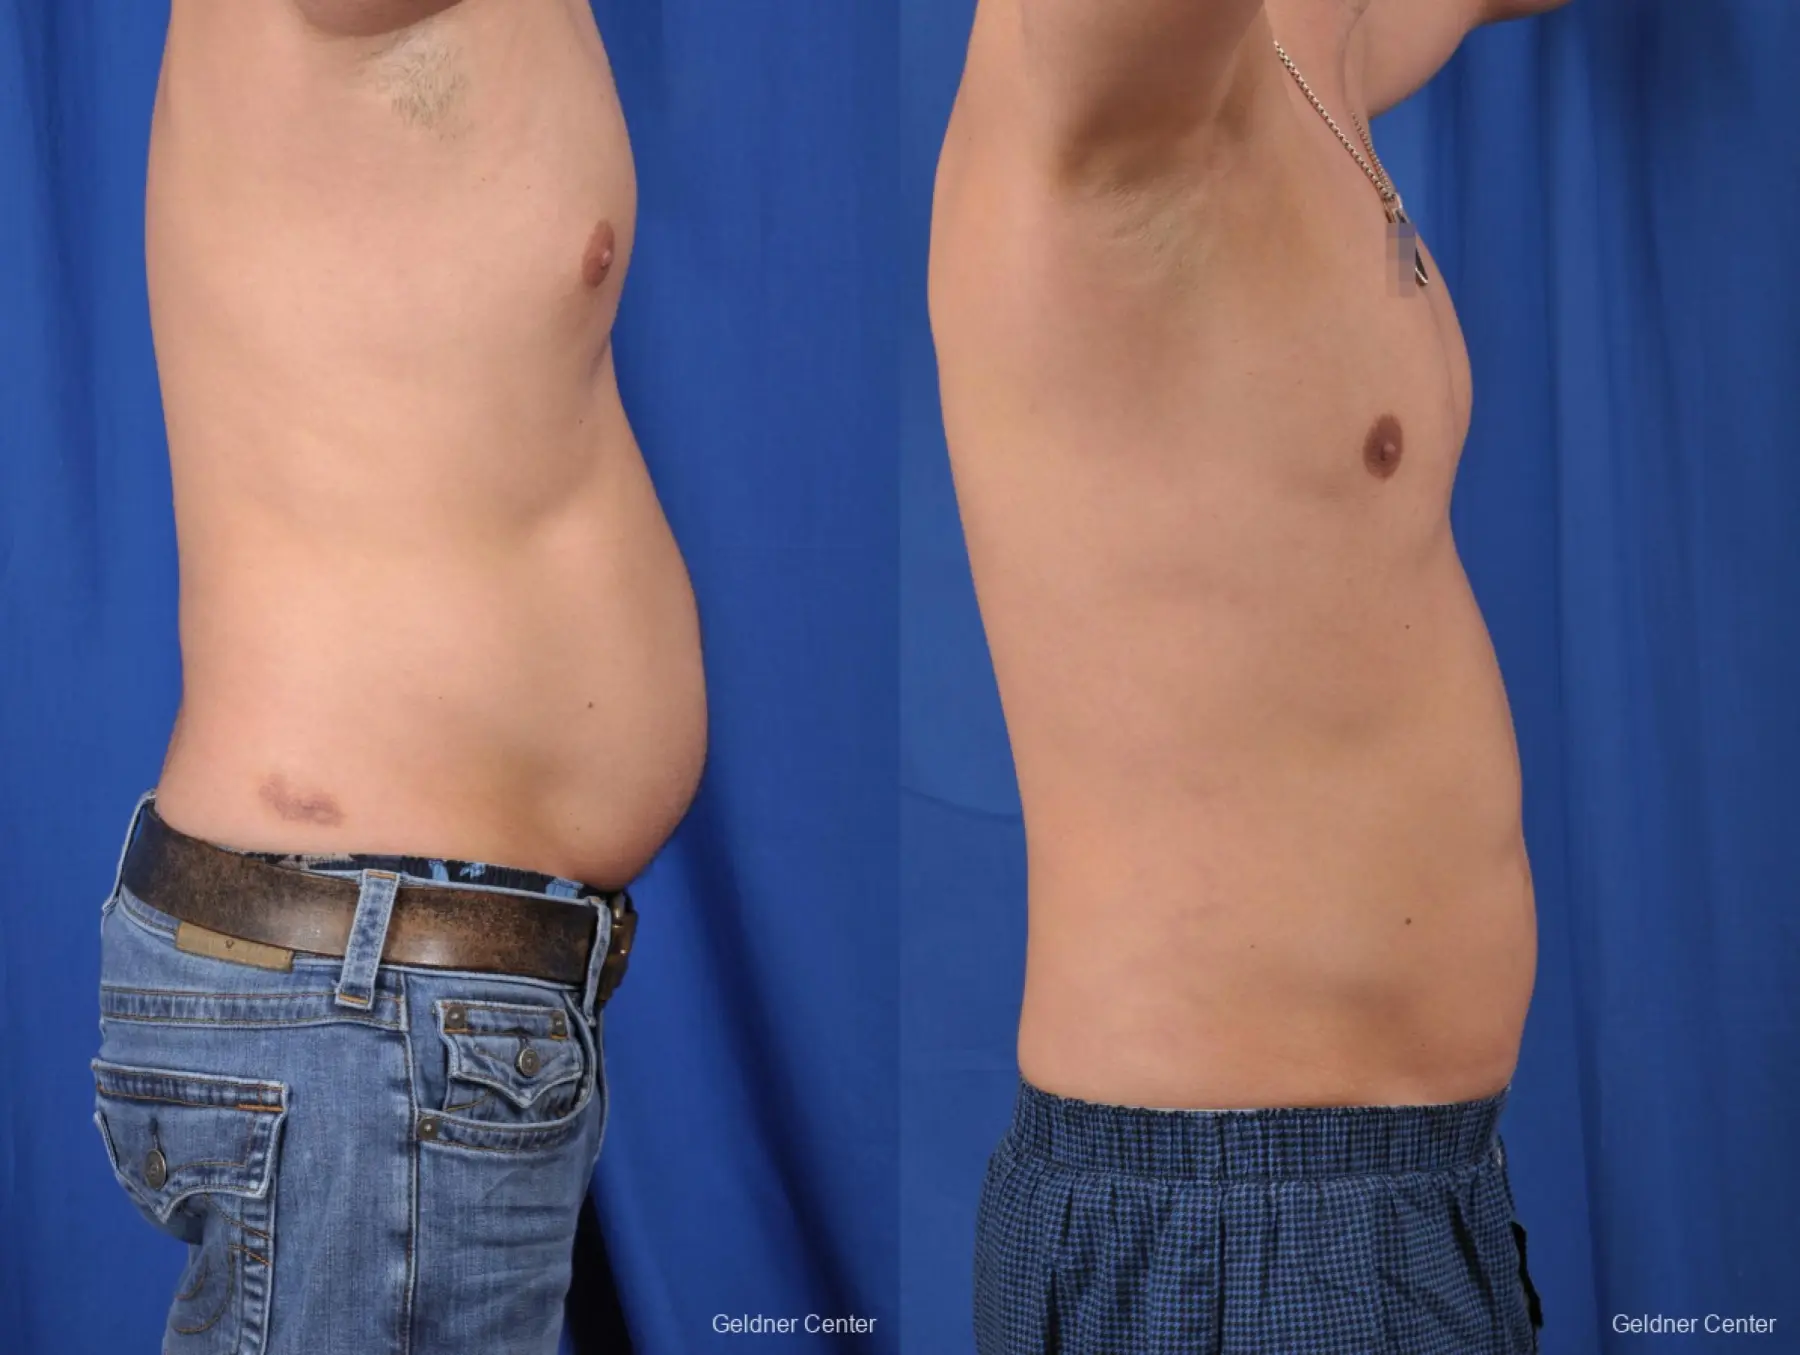 Liposuction For Men: Patient 6 - Before and After 3